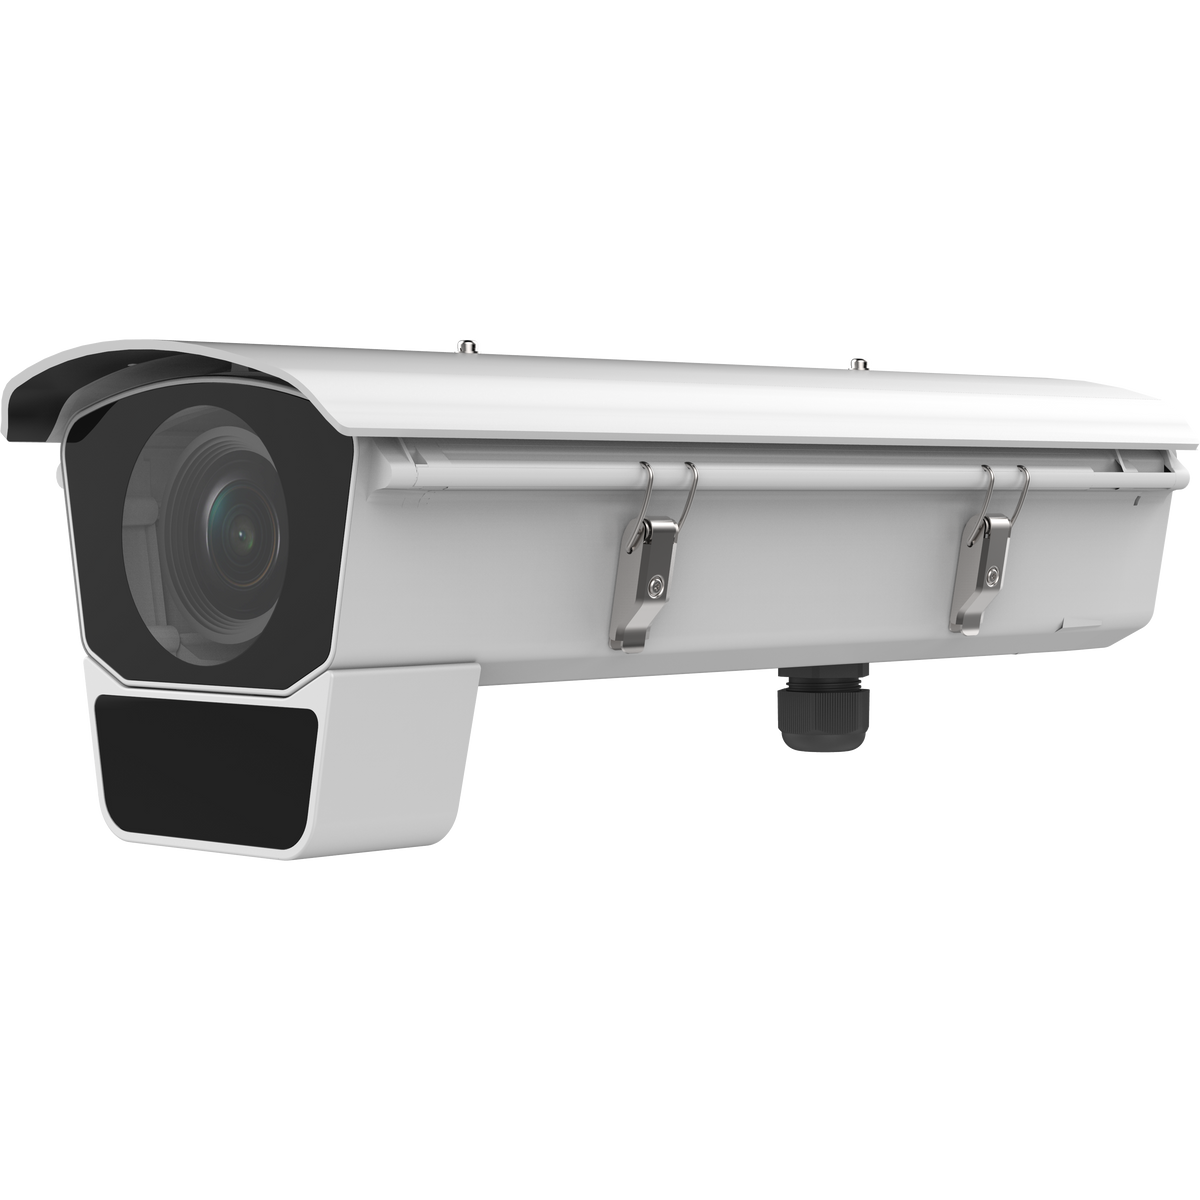 HIKVISION iDS-2CD7046G0/E-IHSY(/F11)(R)